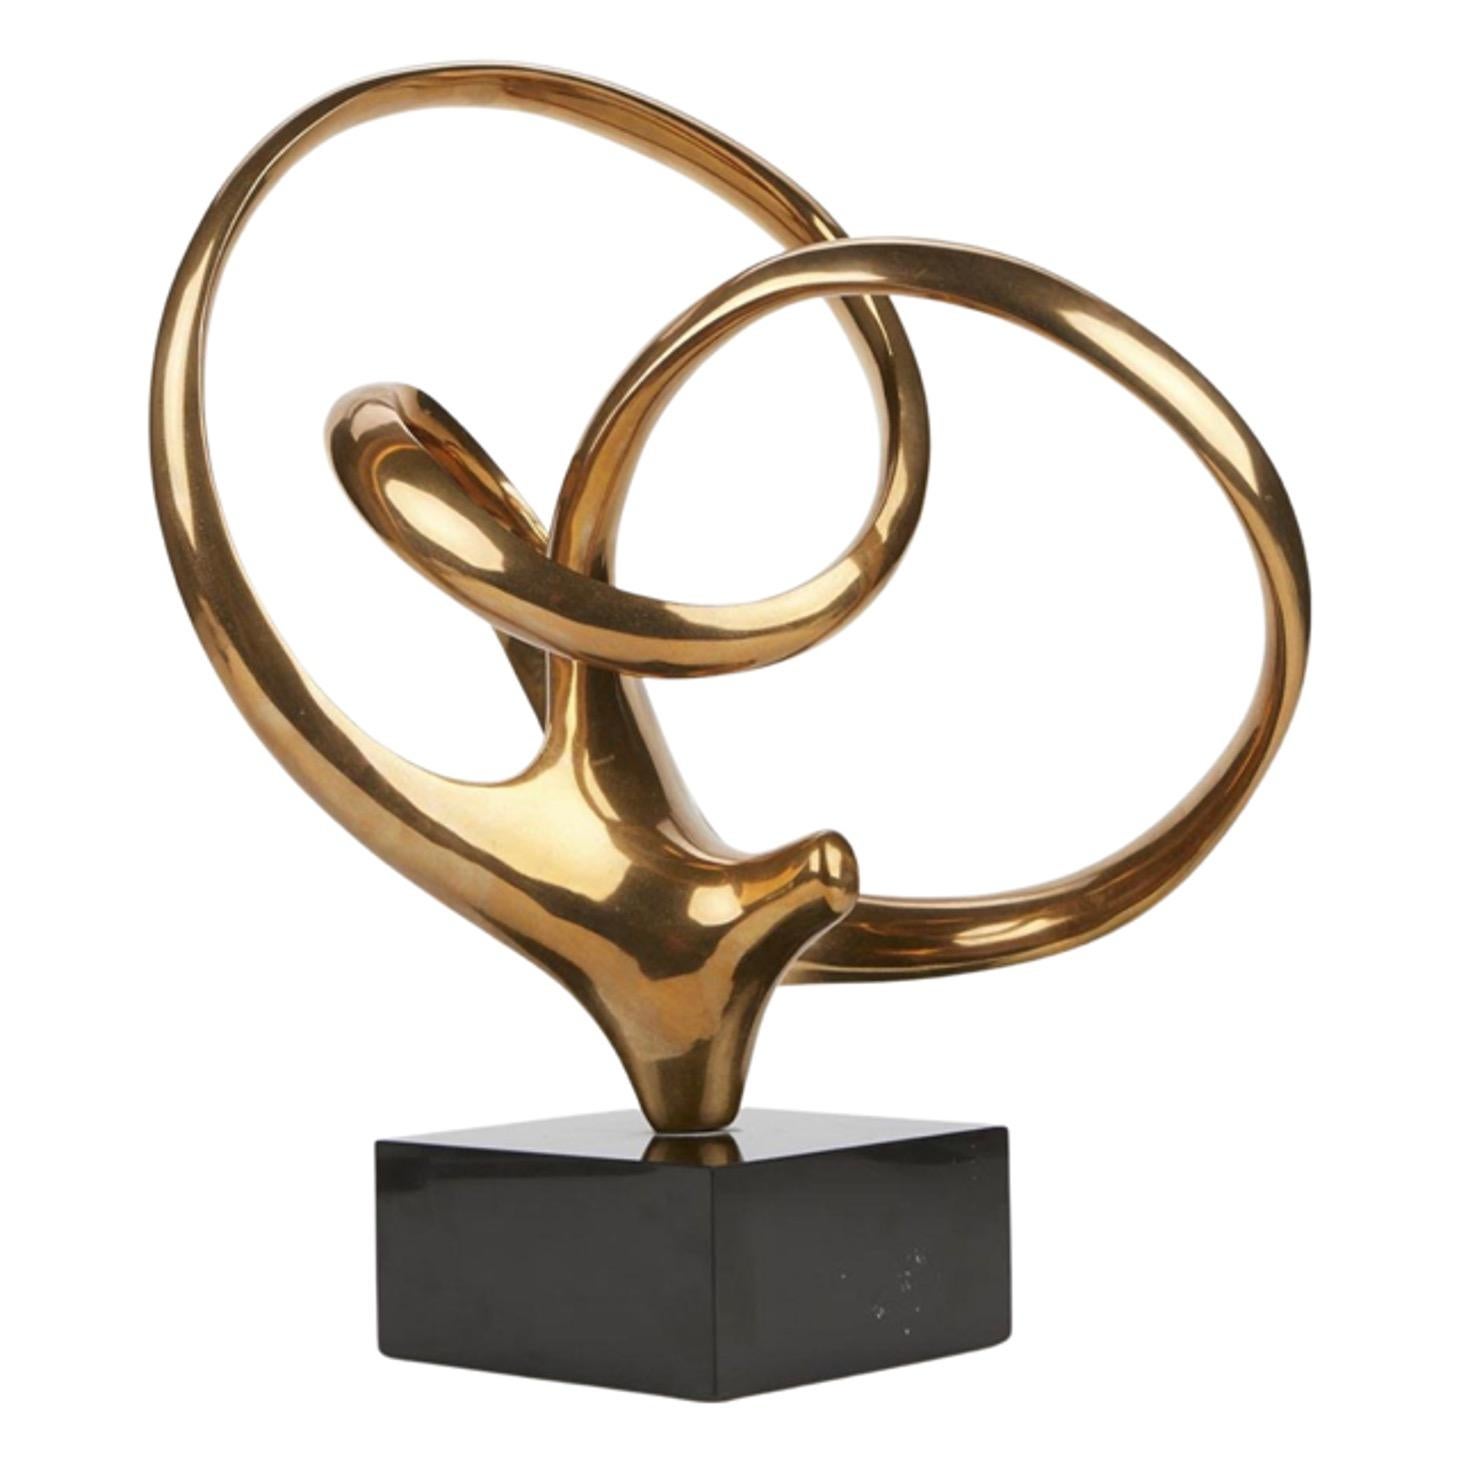 20th century bronze sculpture of an abstract form twisting inwards. Signed and numbered 4/6 along the bronze by Antonio Grediaga Kieff from Madrid, Spain.In this sculpture, we see Kieff's legendary abstract swirling form create several modes of